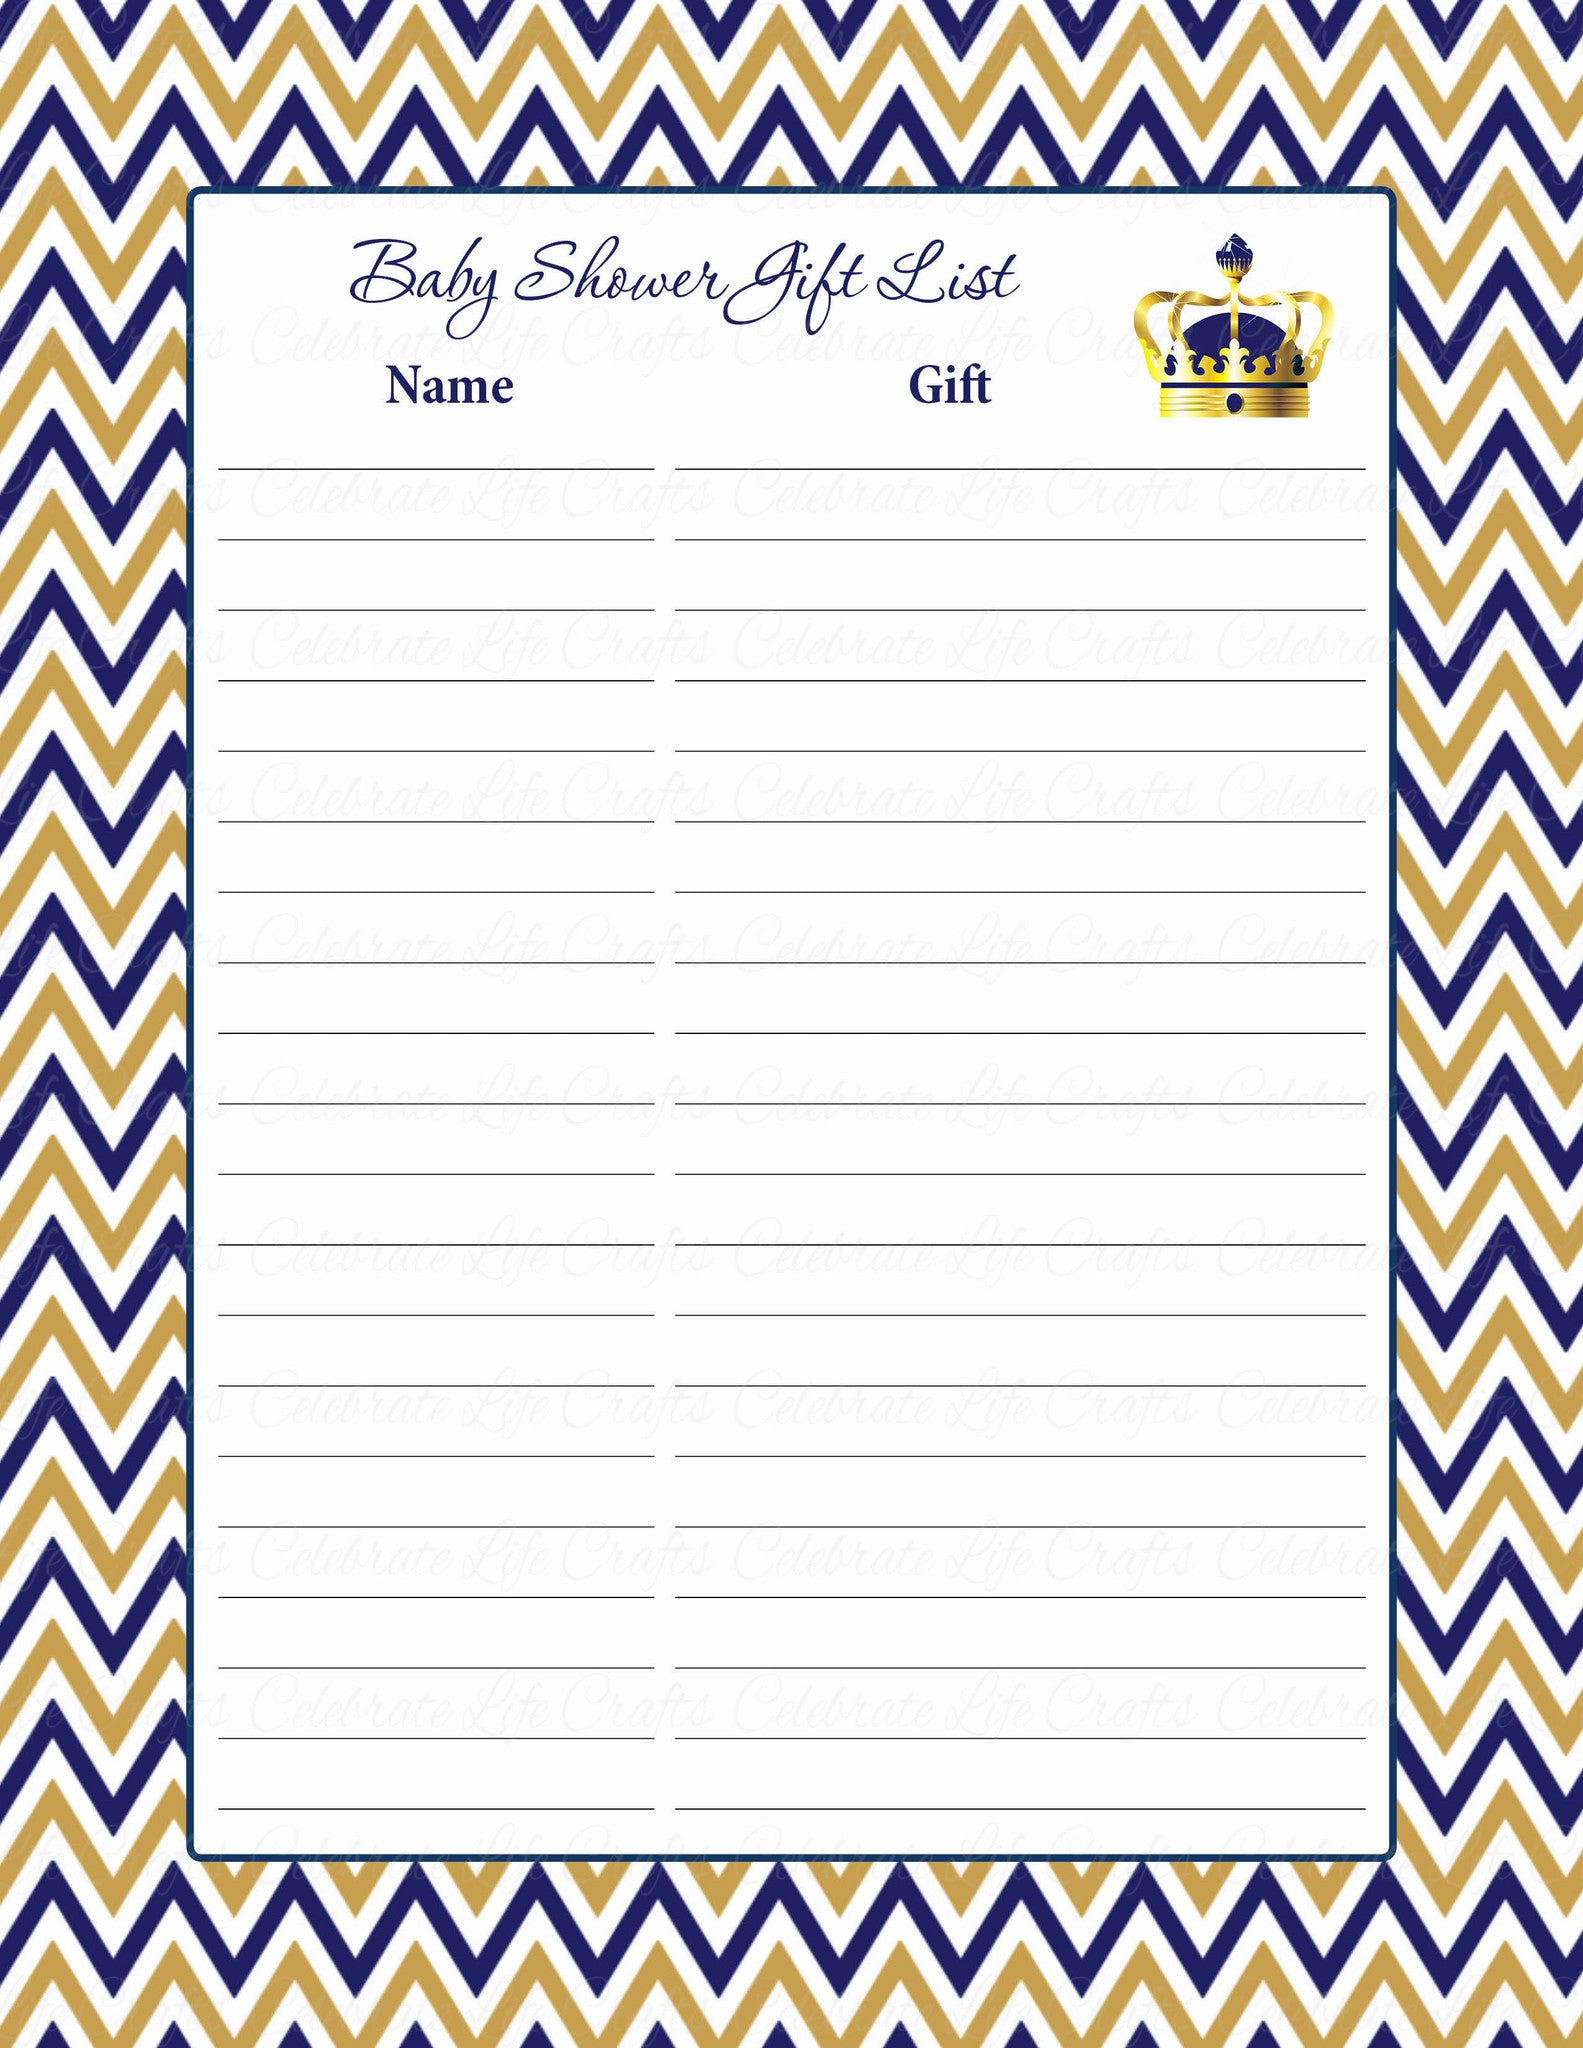 How to Make/Create a Baby Shower Gift List [Templates + Examples] 2023 | Baby  shower gift list, Baby shower pictures, Baby shower printables